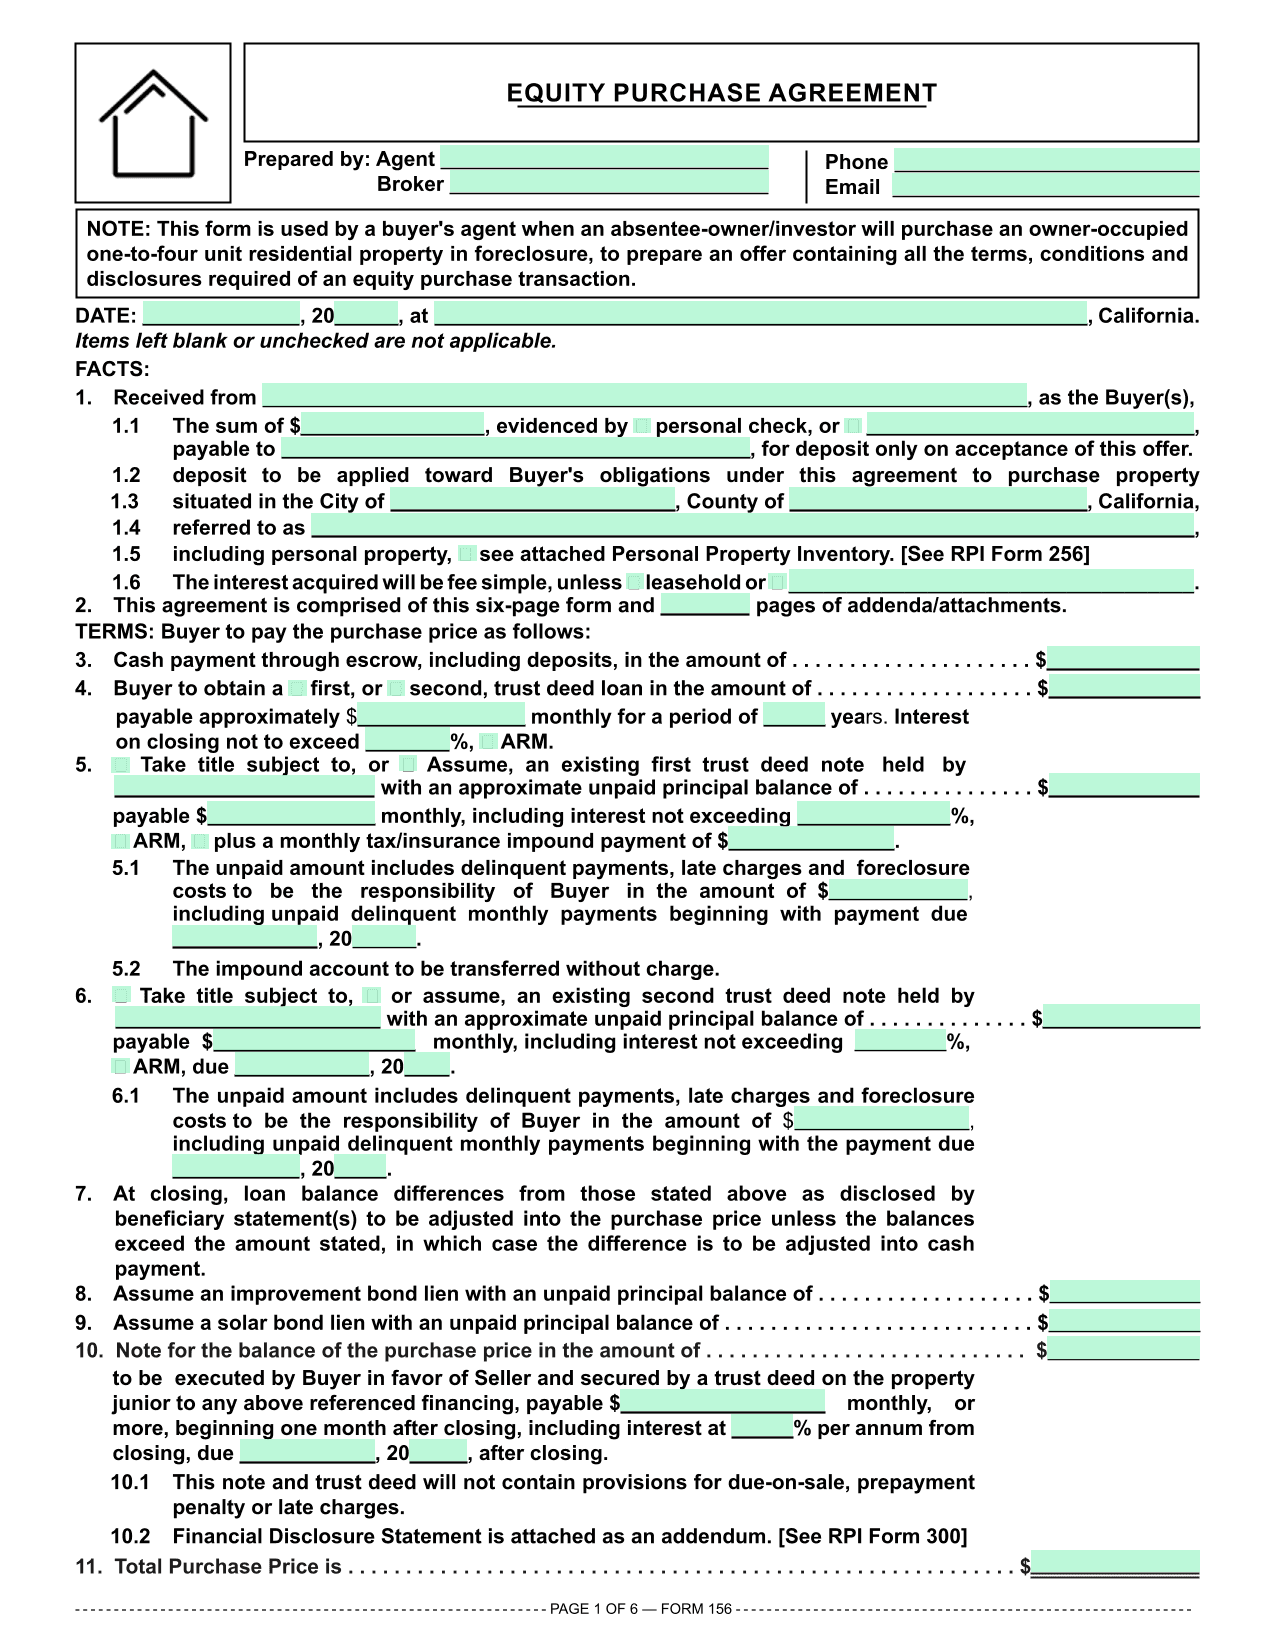 Residential Purchase Agreement (RPI 156) screenshot